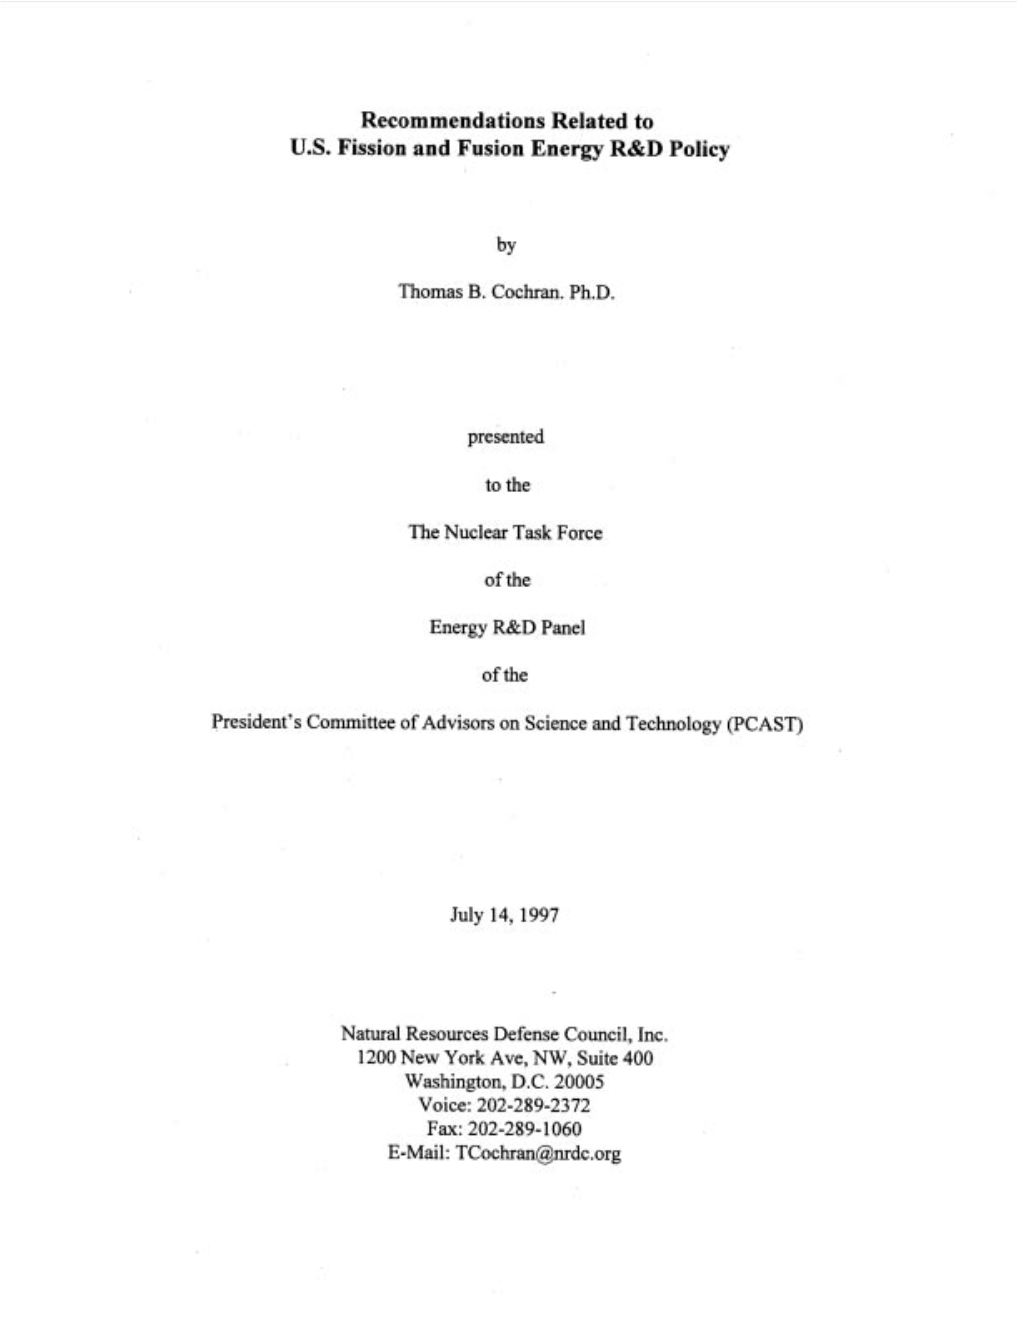 Recommendations Related to U.S. Fission and Fusion Energy R&D